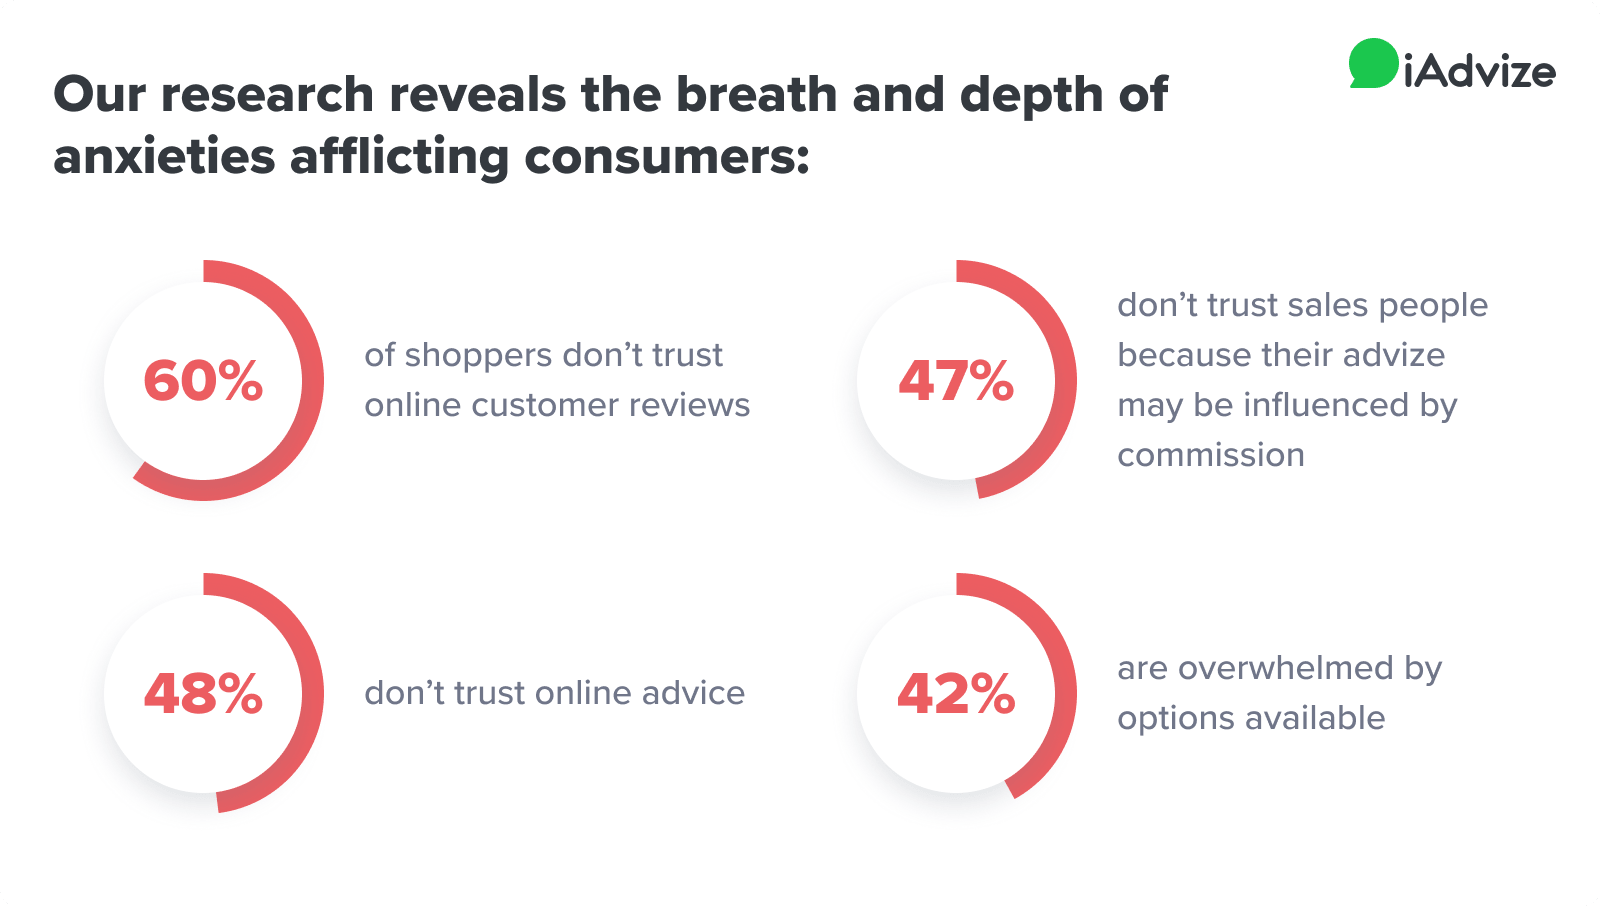 Our research found that half of people felt some anxieties when shopping online